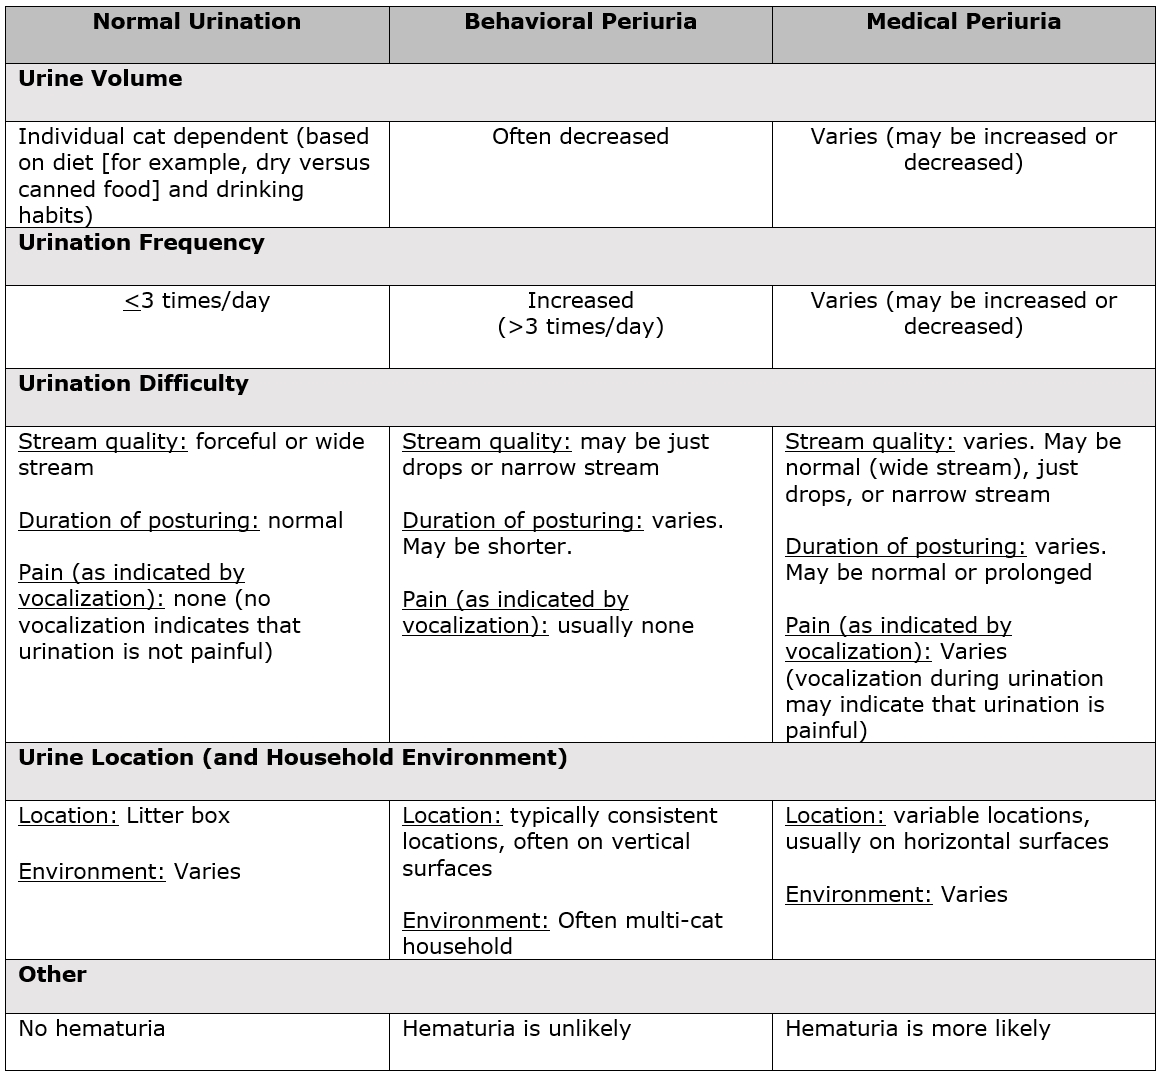 Table showing characteristics of normal urination versus behavioral or medical periuria